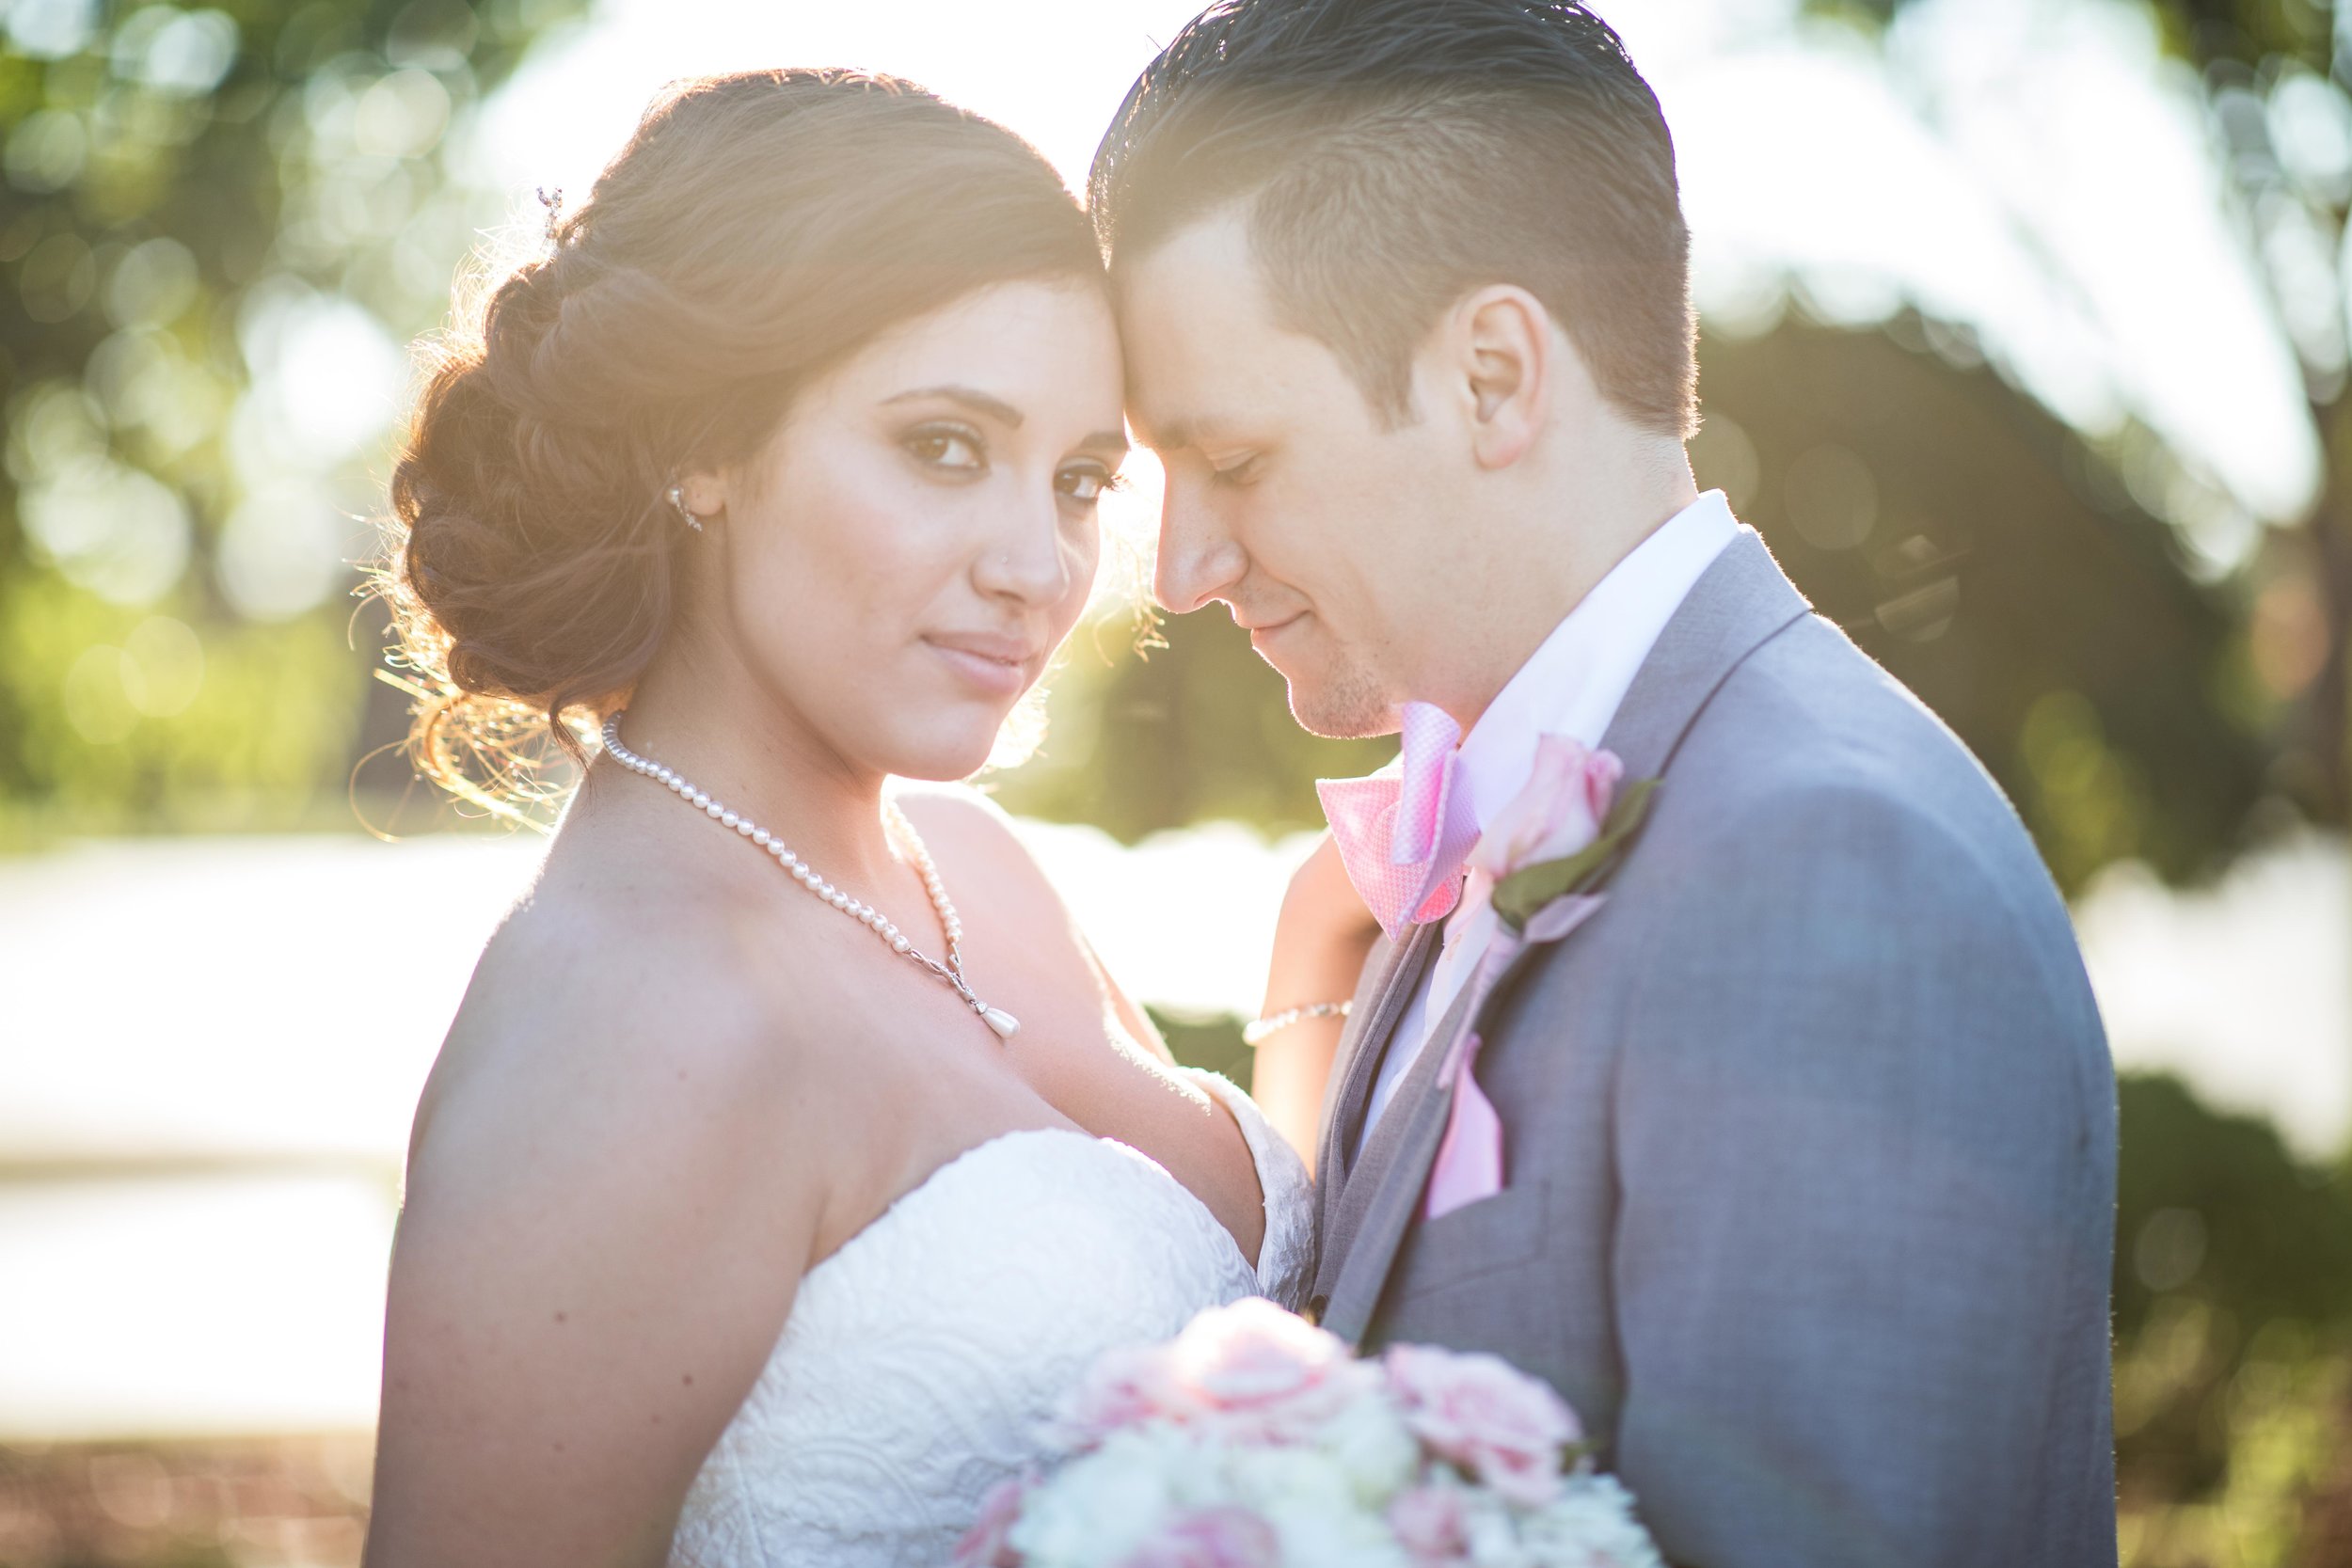  Bride looks directly at the photographer while the groom holds her close during sunset 